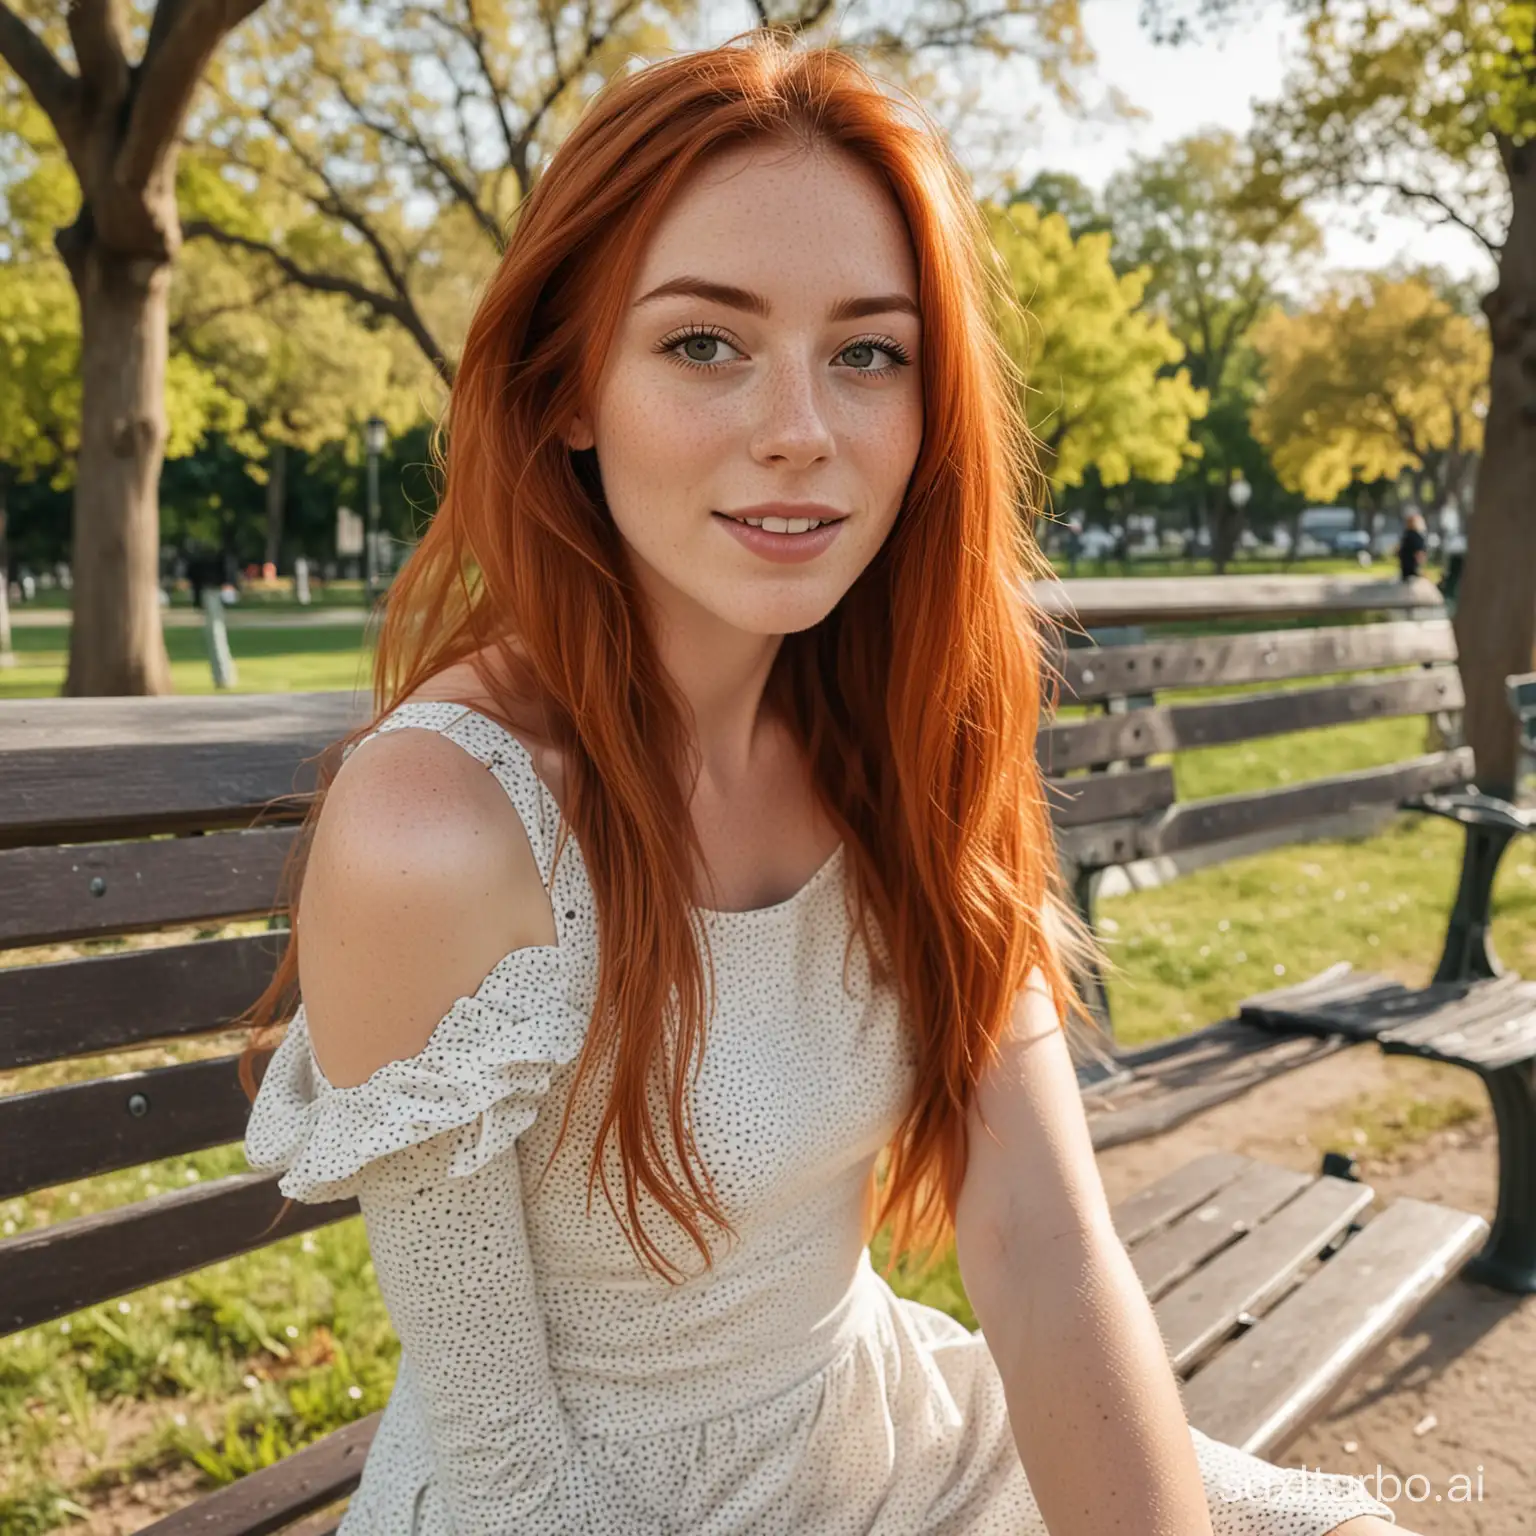 A very beautiful girl with long red hair and freckles taking a selfie while sitting on a bench at a park. She has a perfect feminine body wearing a skin tight dress.